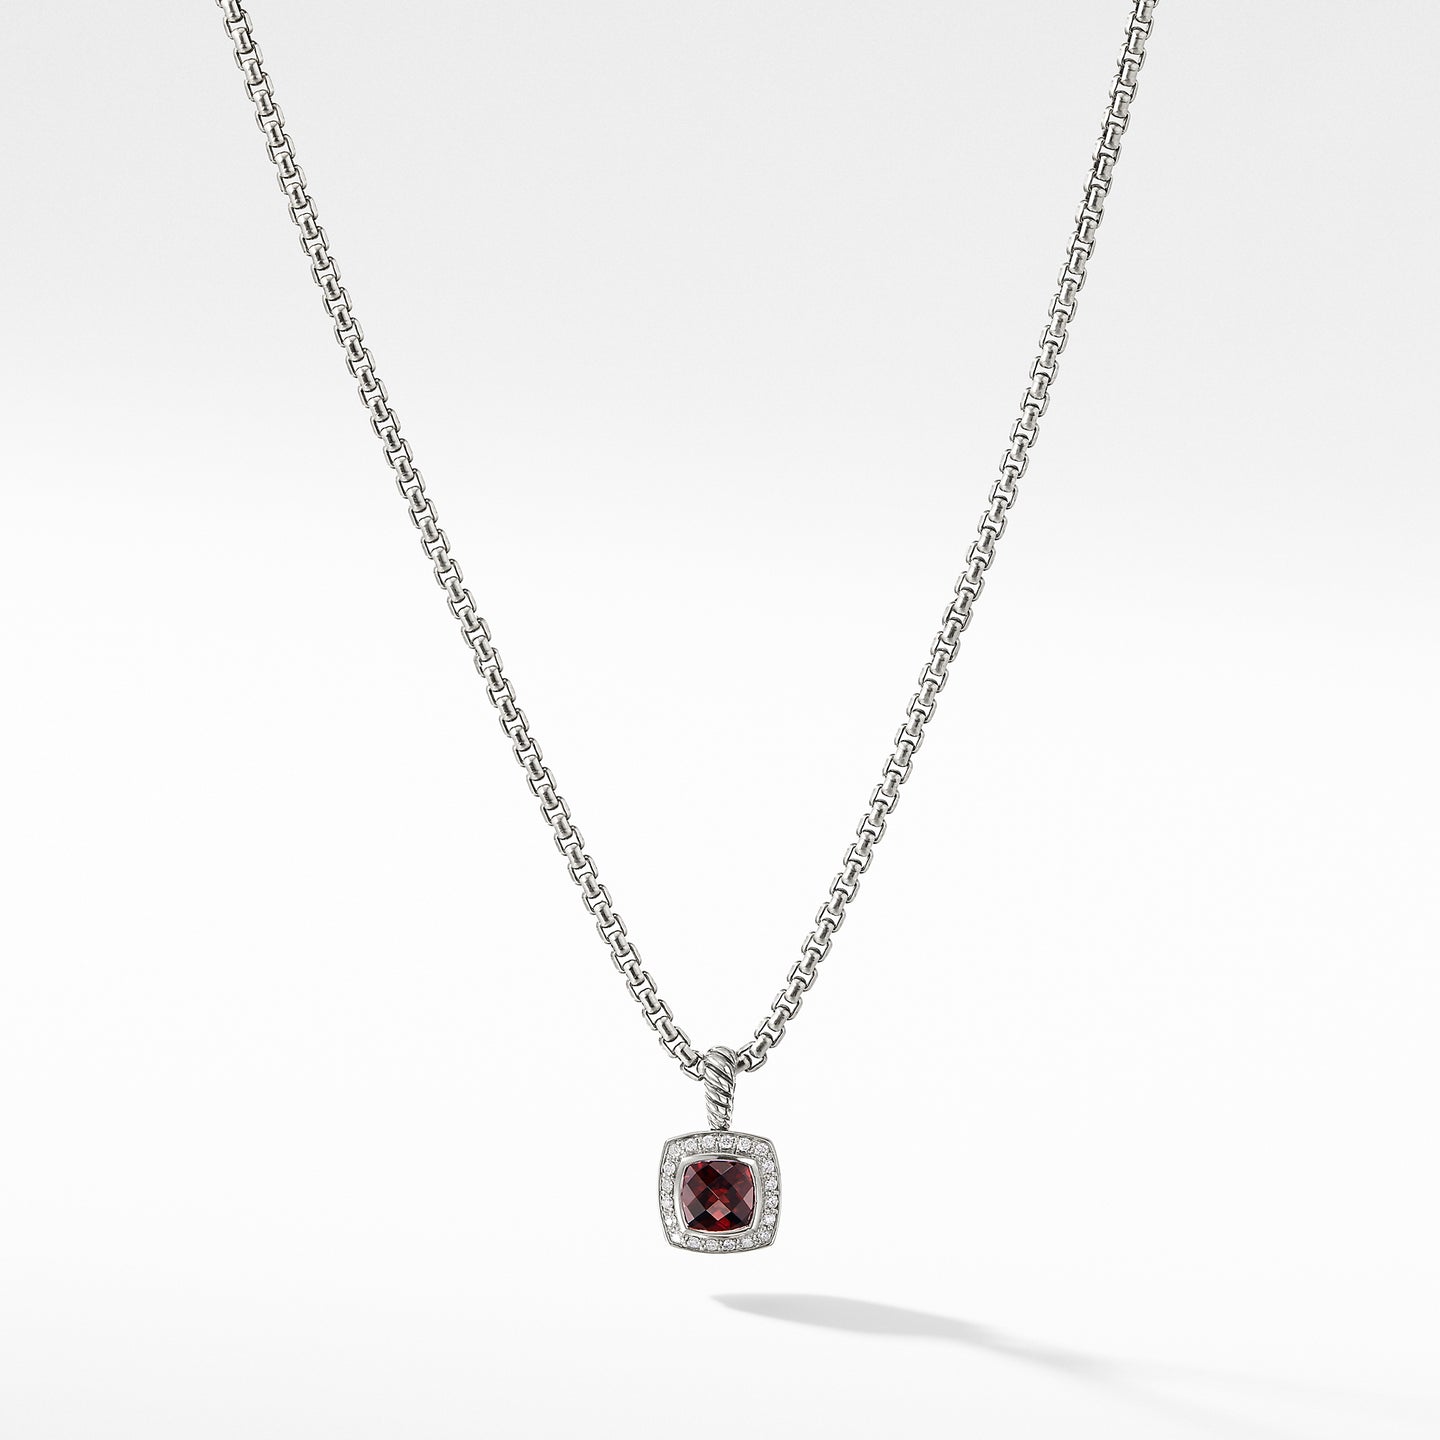 Pendant Necklace with Pyrope Garnet and Diamonds, 17